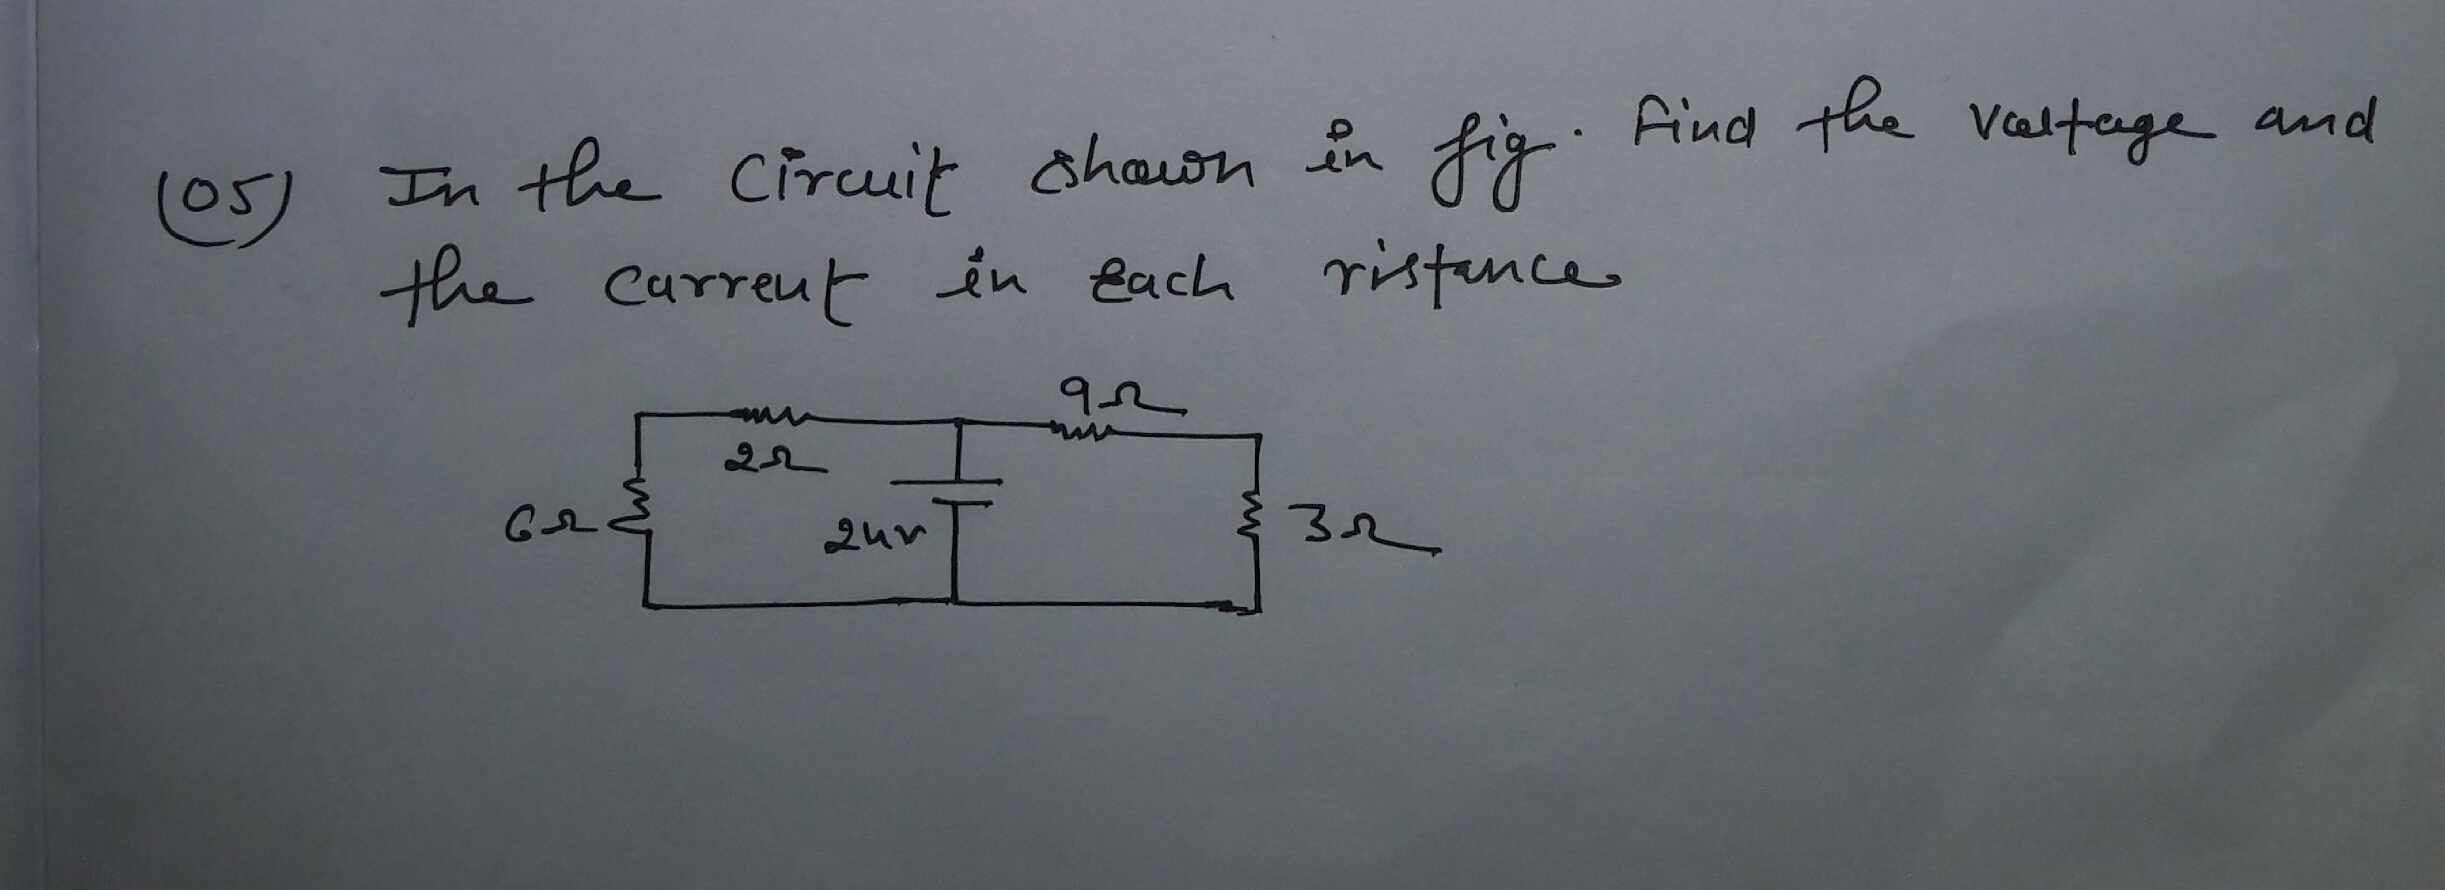 find the veltaage and
(05)
In the Circuit shaon in fig.
the curreut in Bach ristence
92
